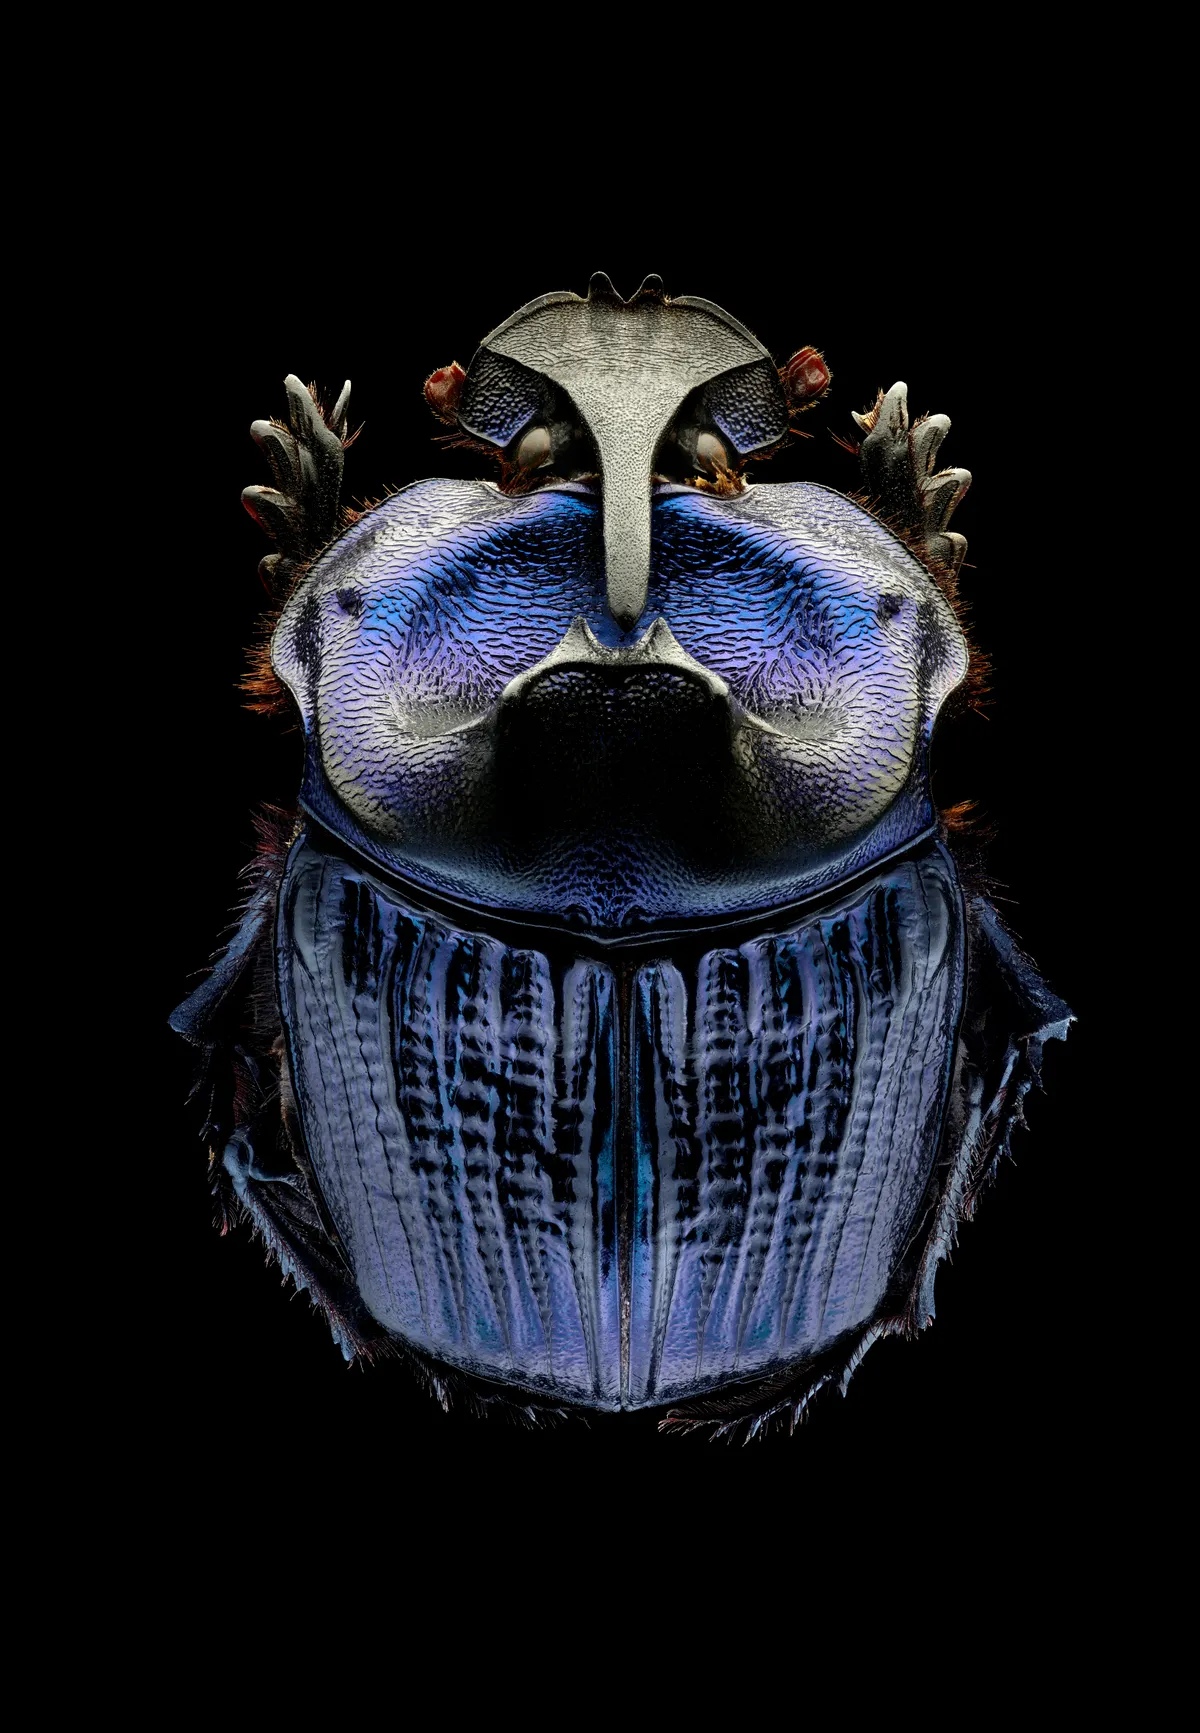 Amazonian purple warrior scarab. A large and impressive scarab beetle found widely across the Amazon basin. © Levon Biss